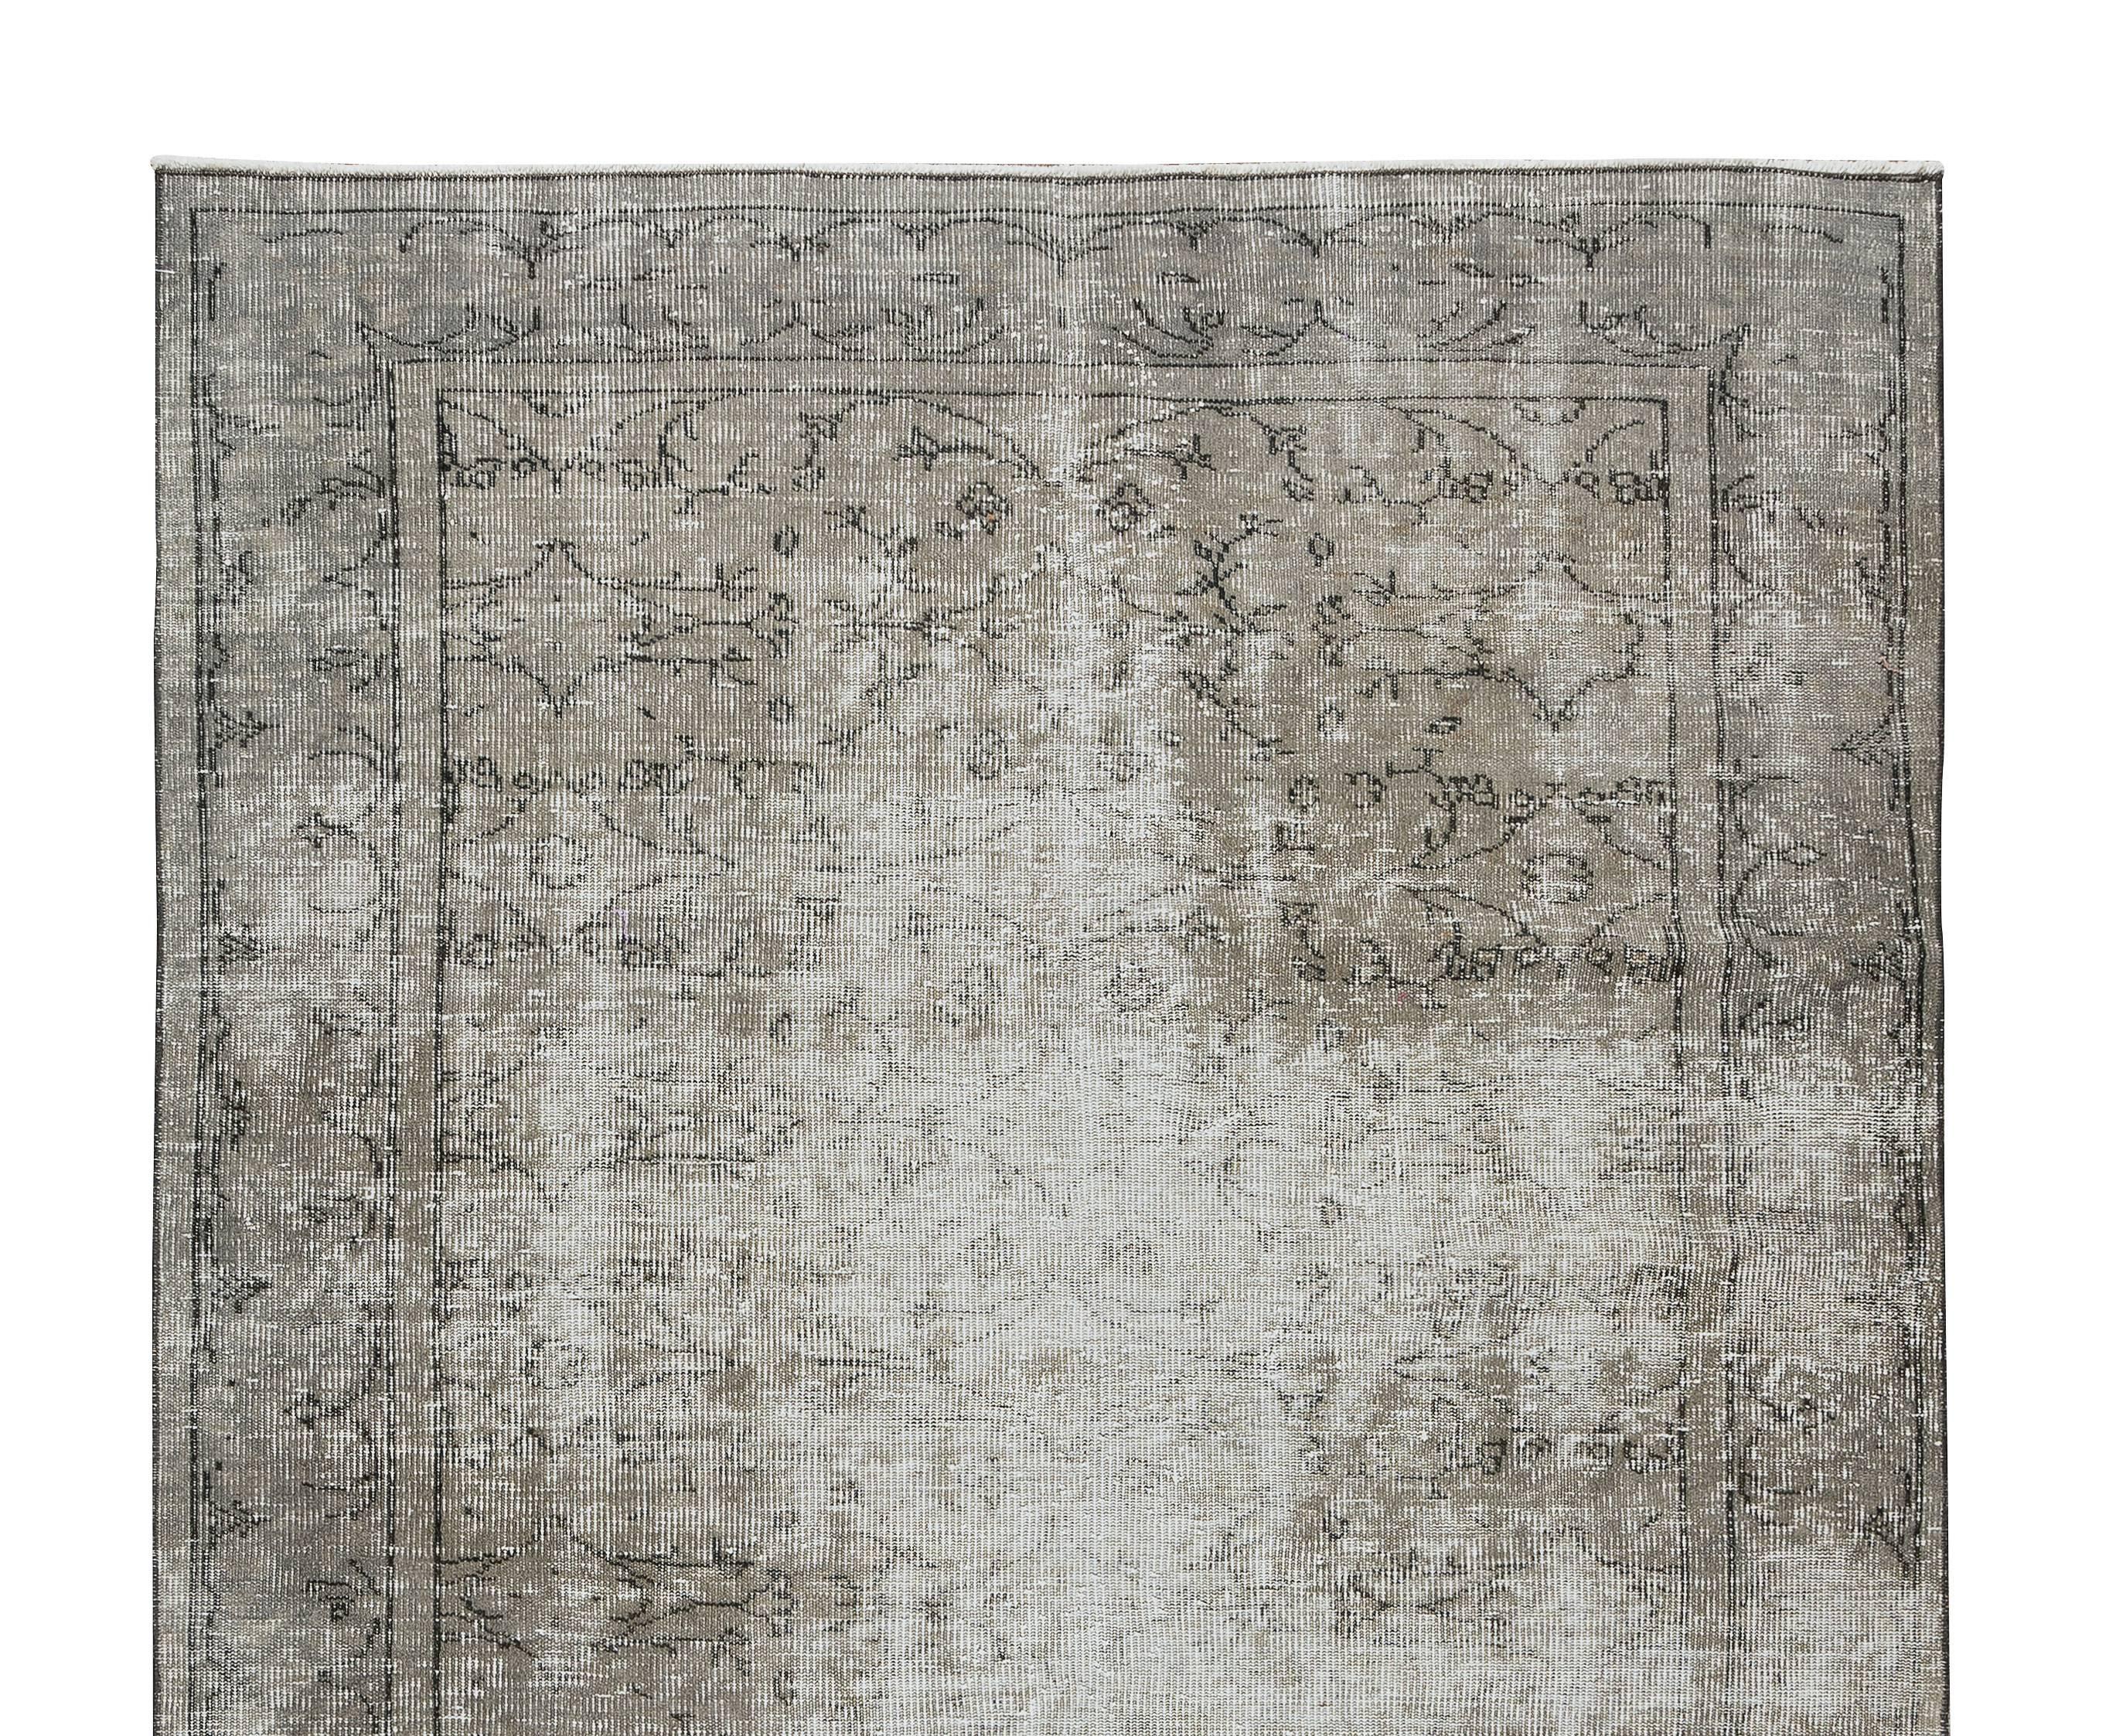 Turkish 5.3x8.9 Ft Distressed 1950s Handmade Anatolian Area Rug Over-Dyed in Gray Color For Sale